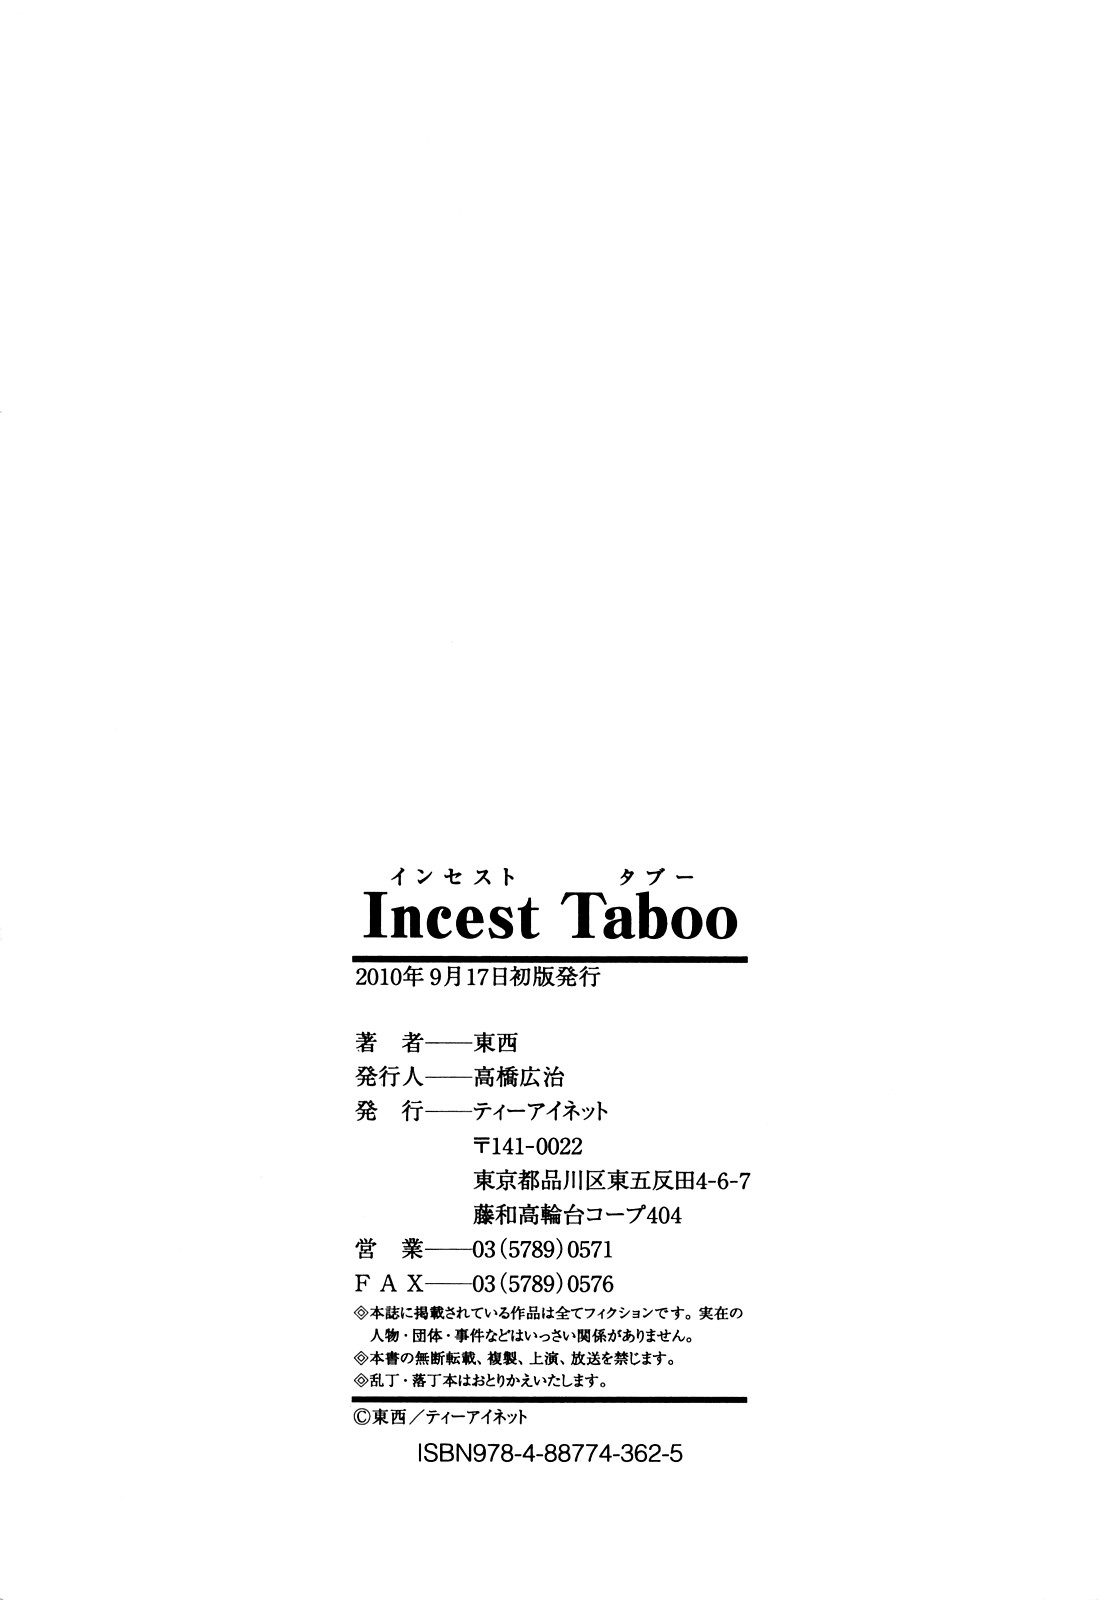 [Tohzai] Incest Taboo [東西] インセスト・タブー